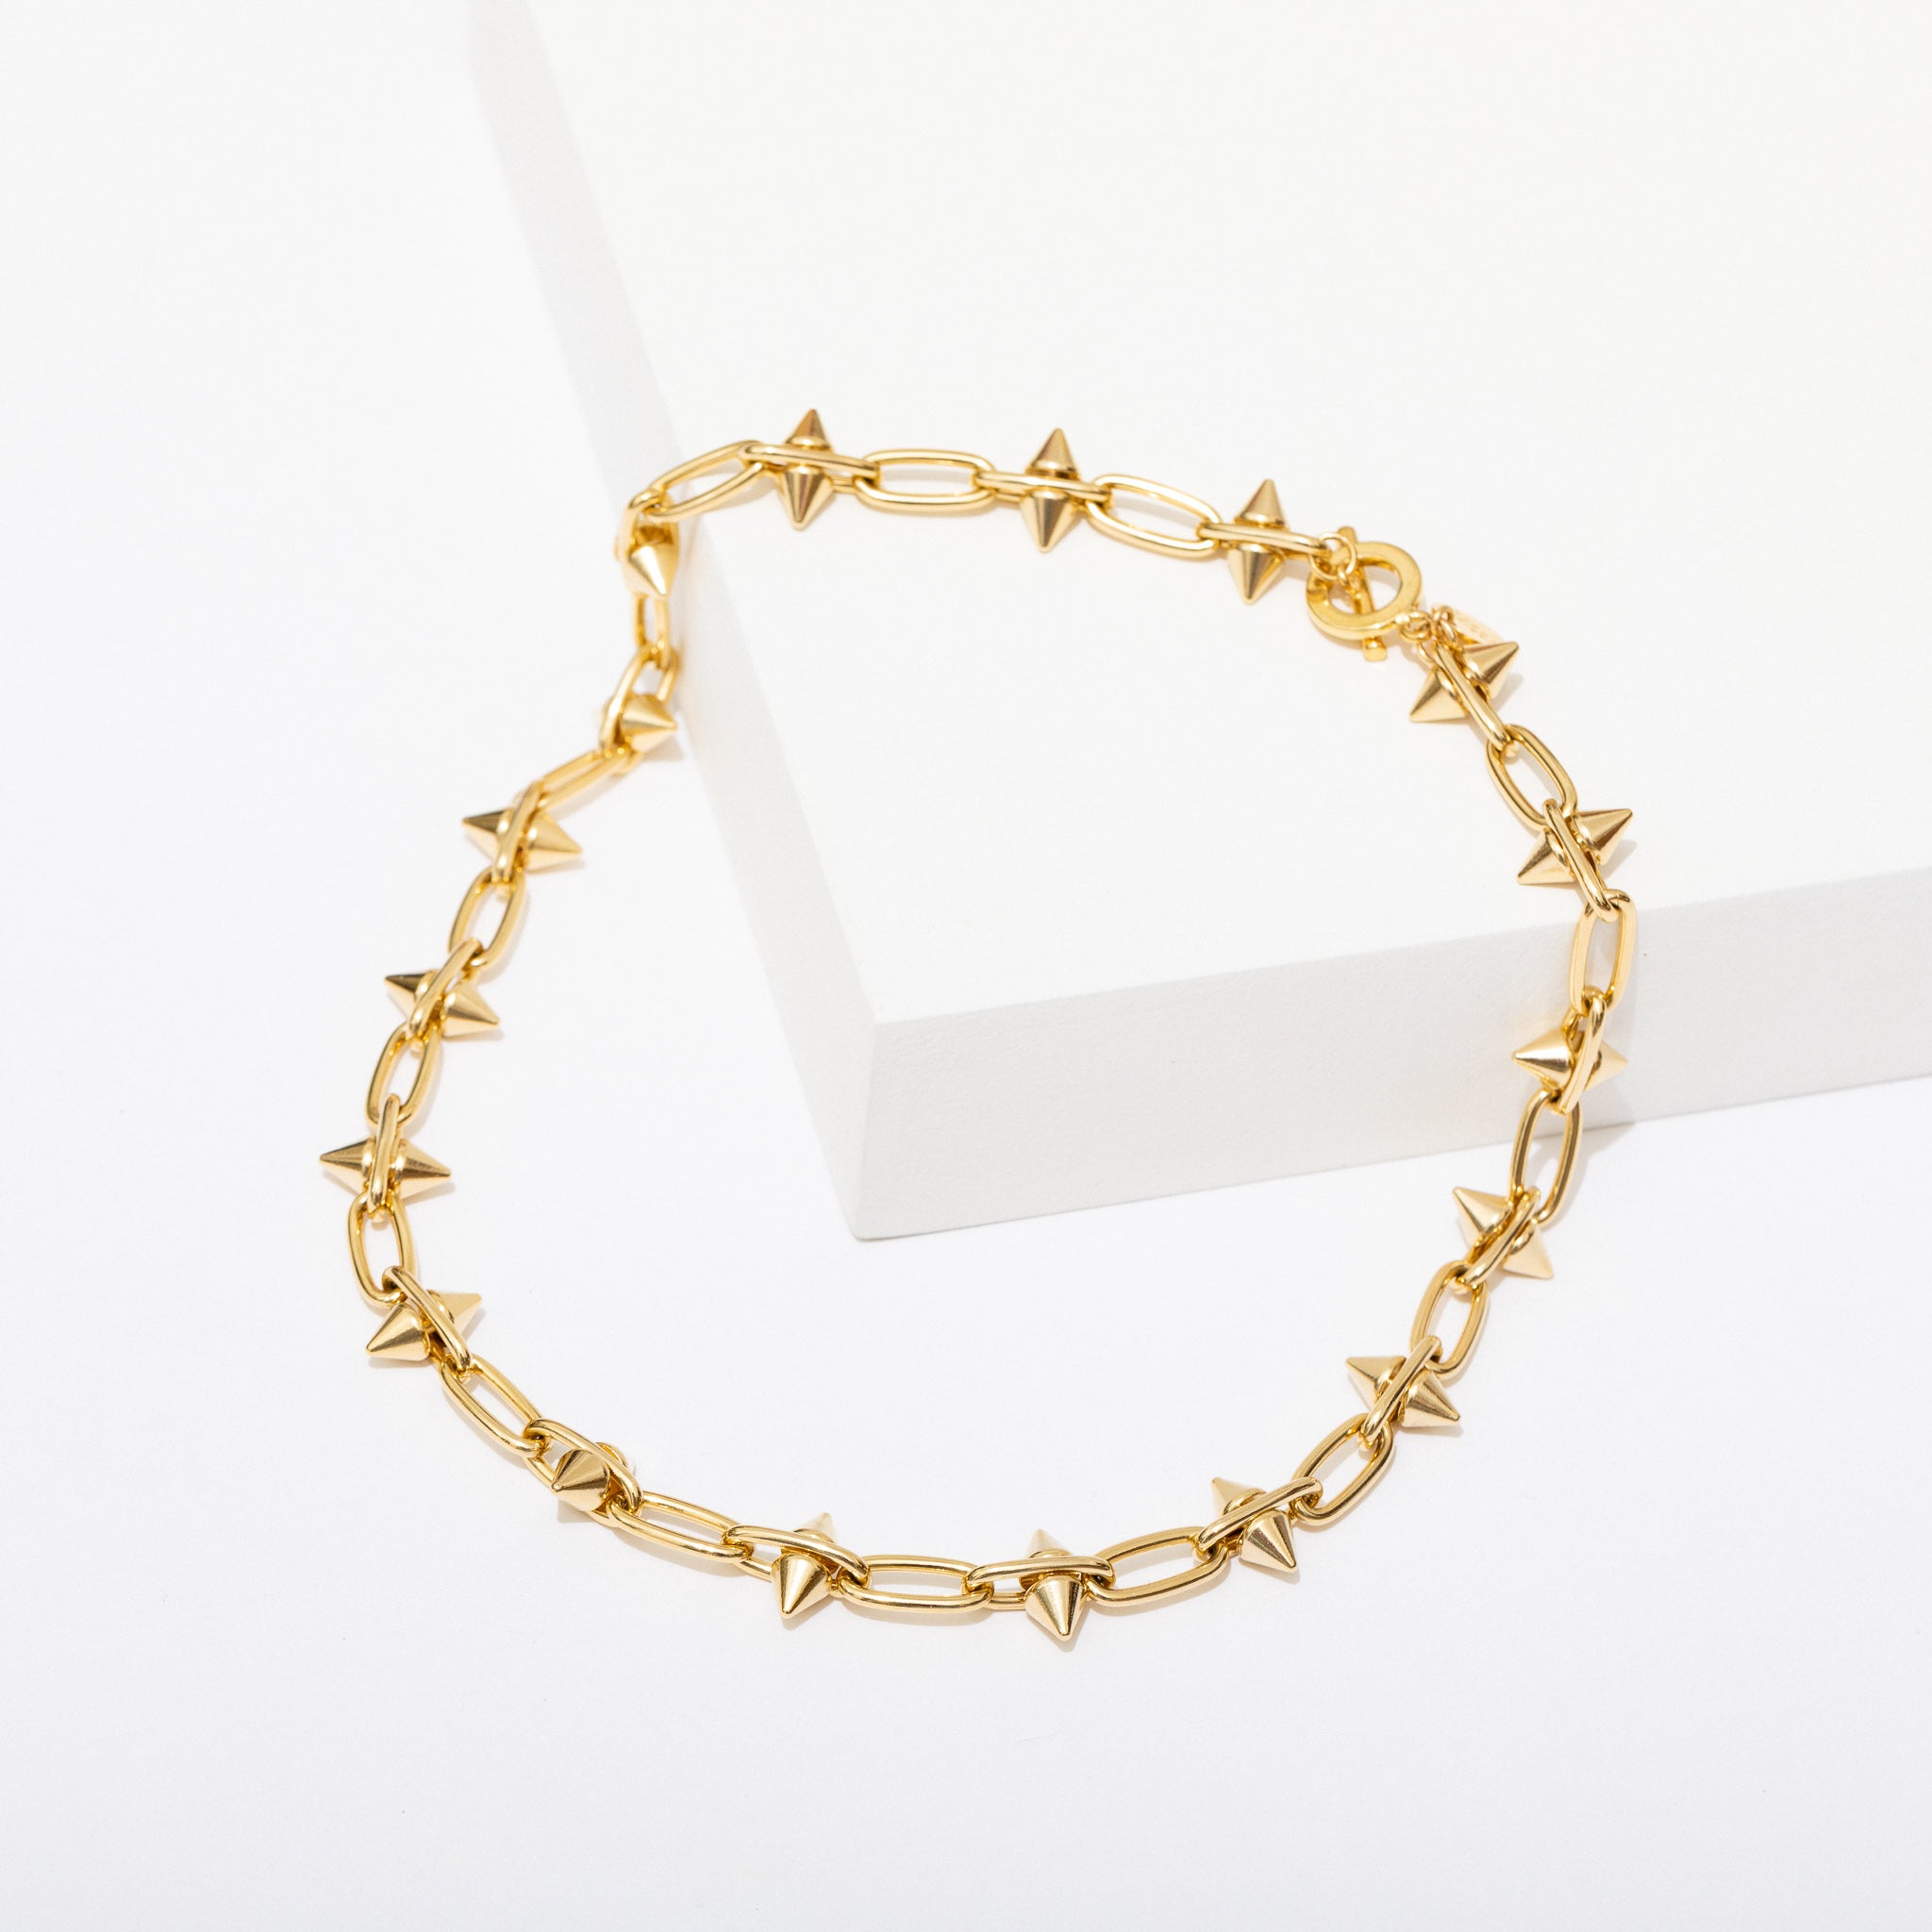 Toom Bracelet | 14K Gold Plated Spike Barbed Wire Chain | Larissa Loden 14K Gold Plate